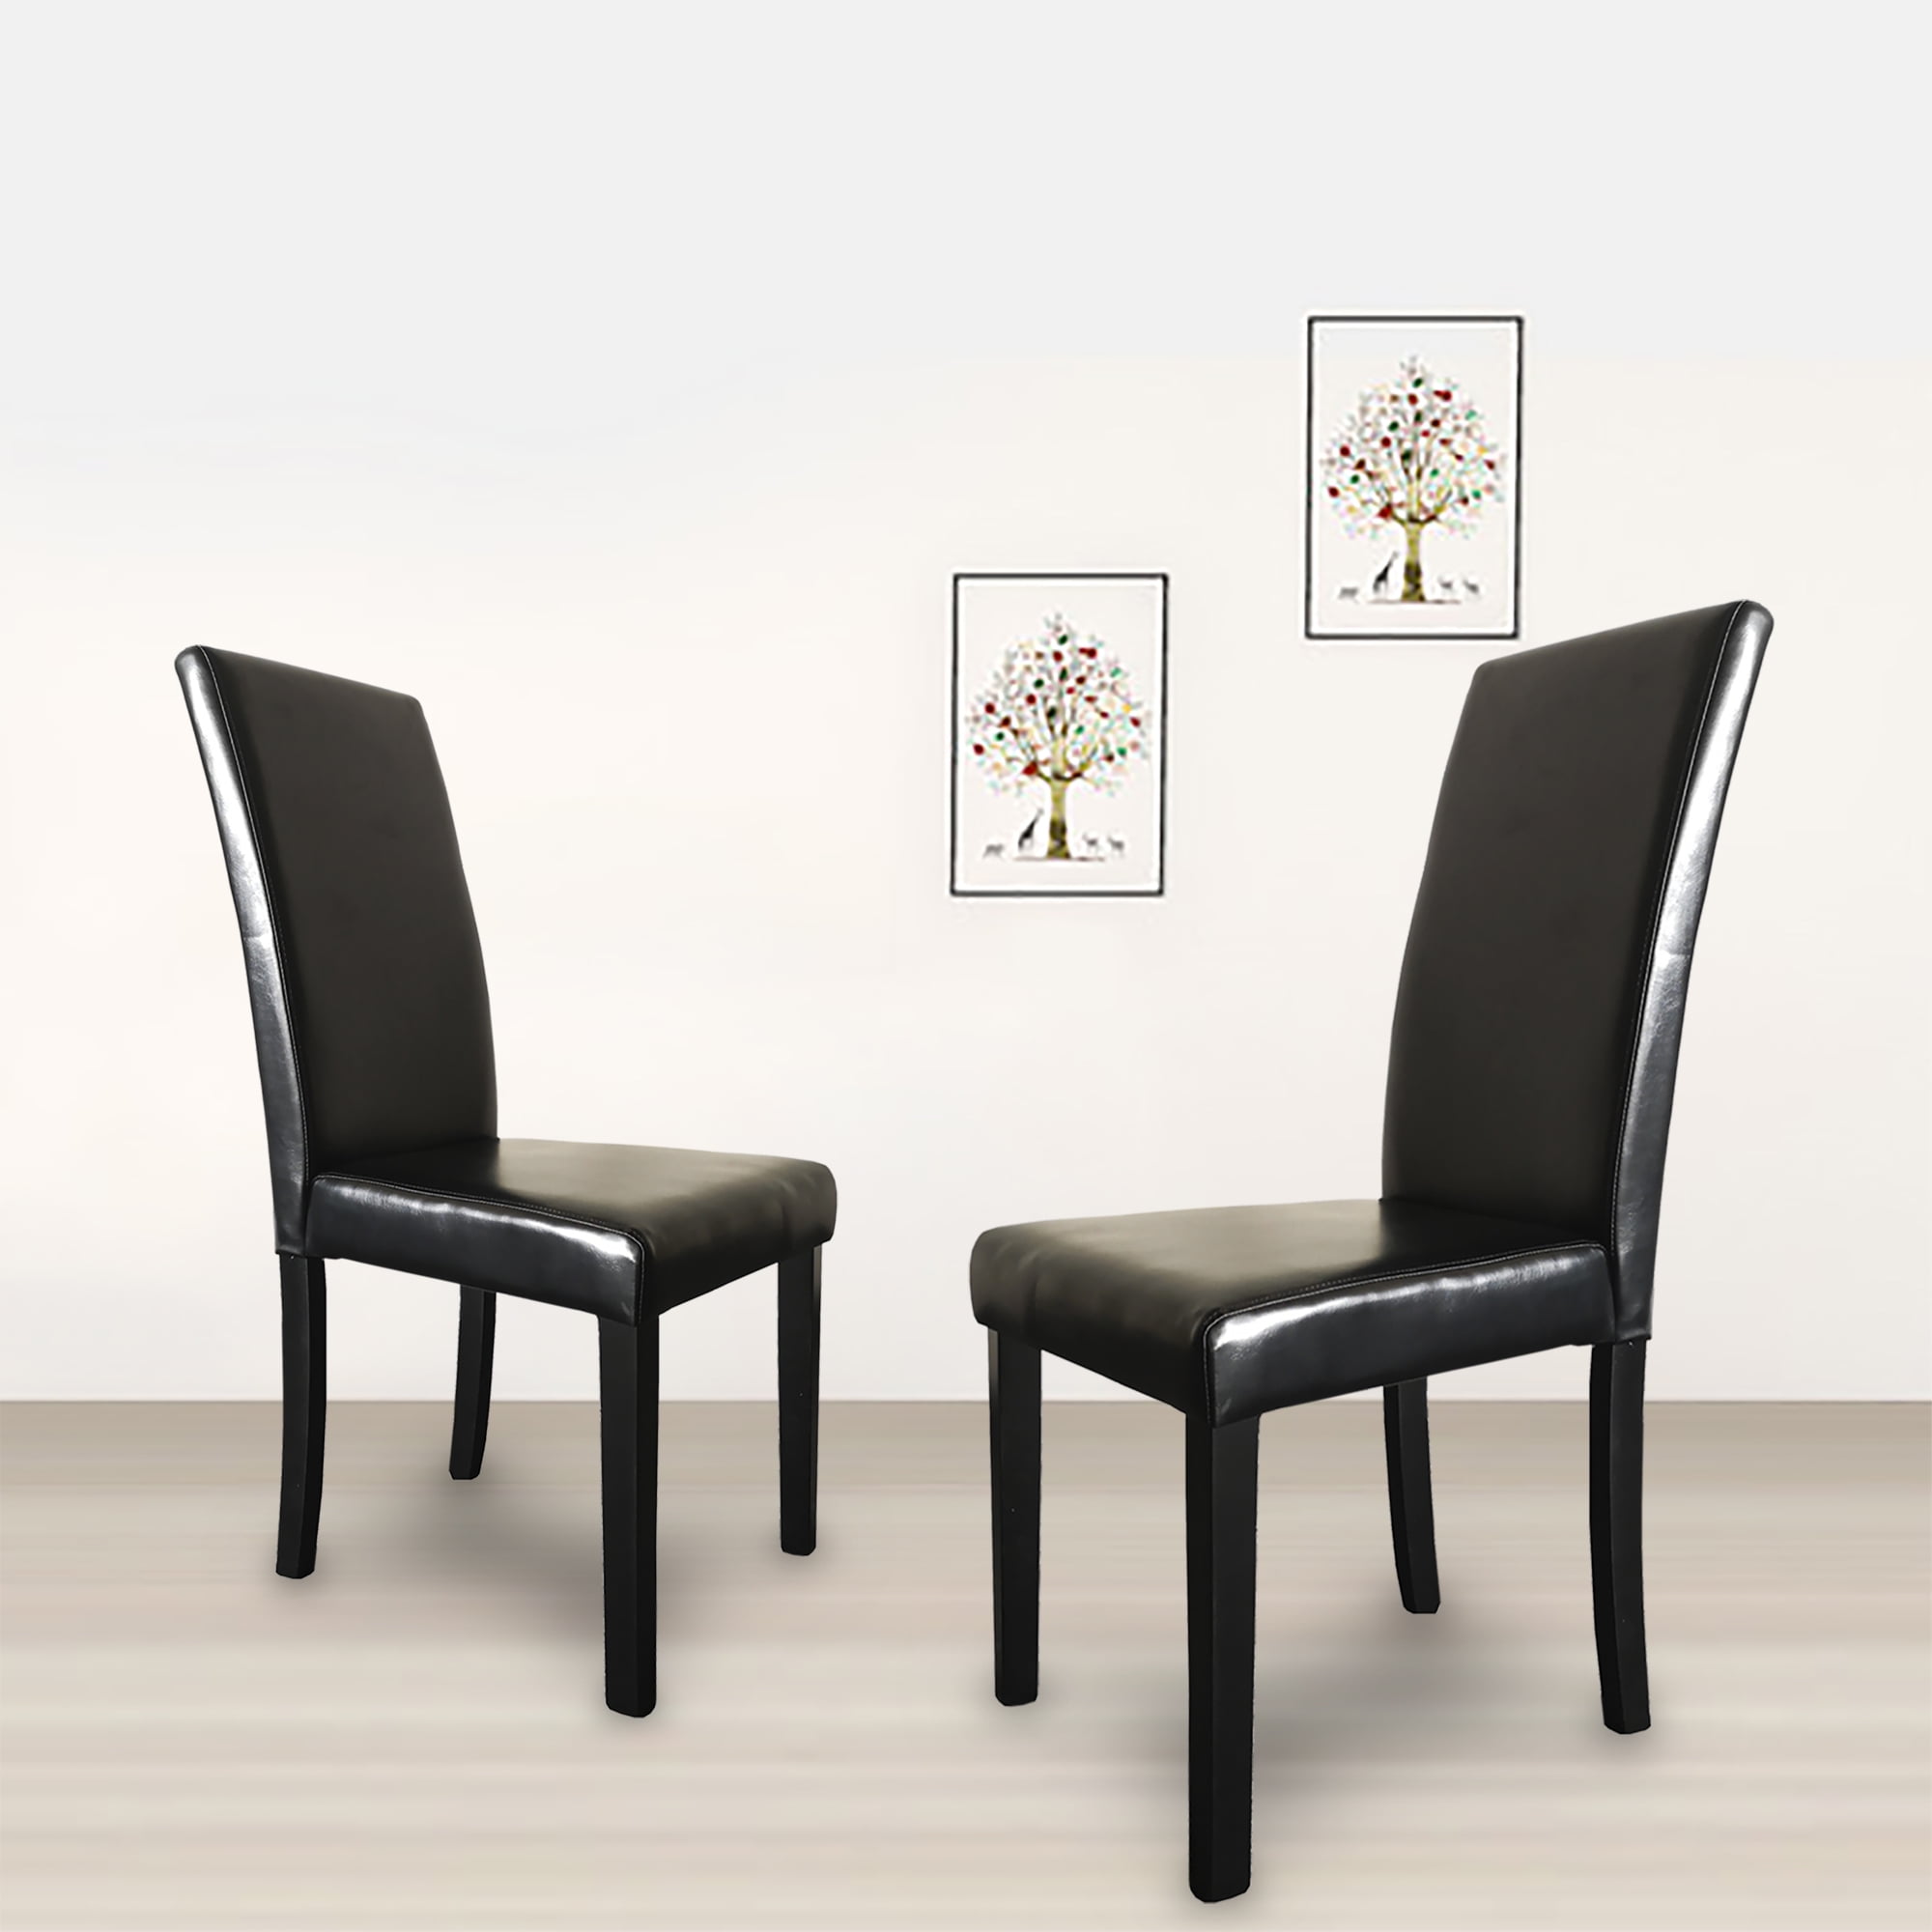  Walmart Dining Chairs for Small Space